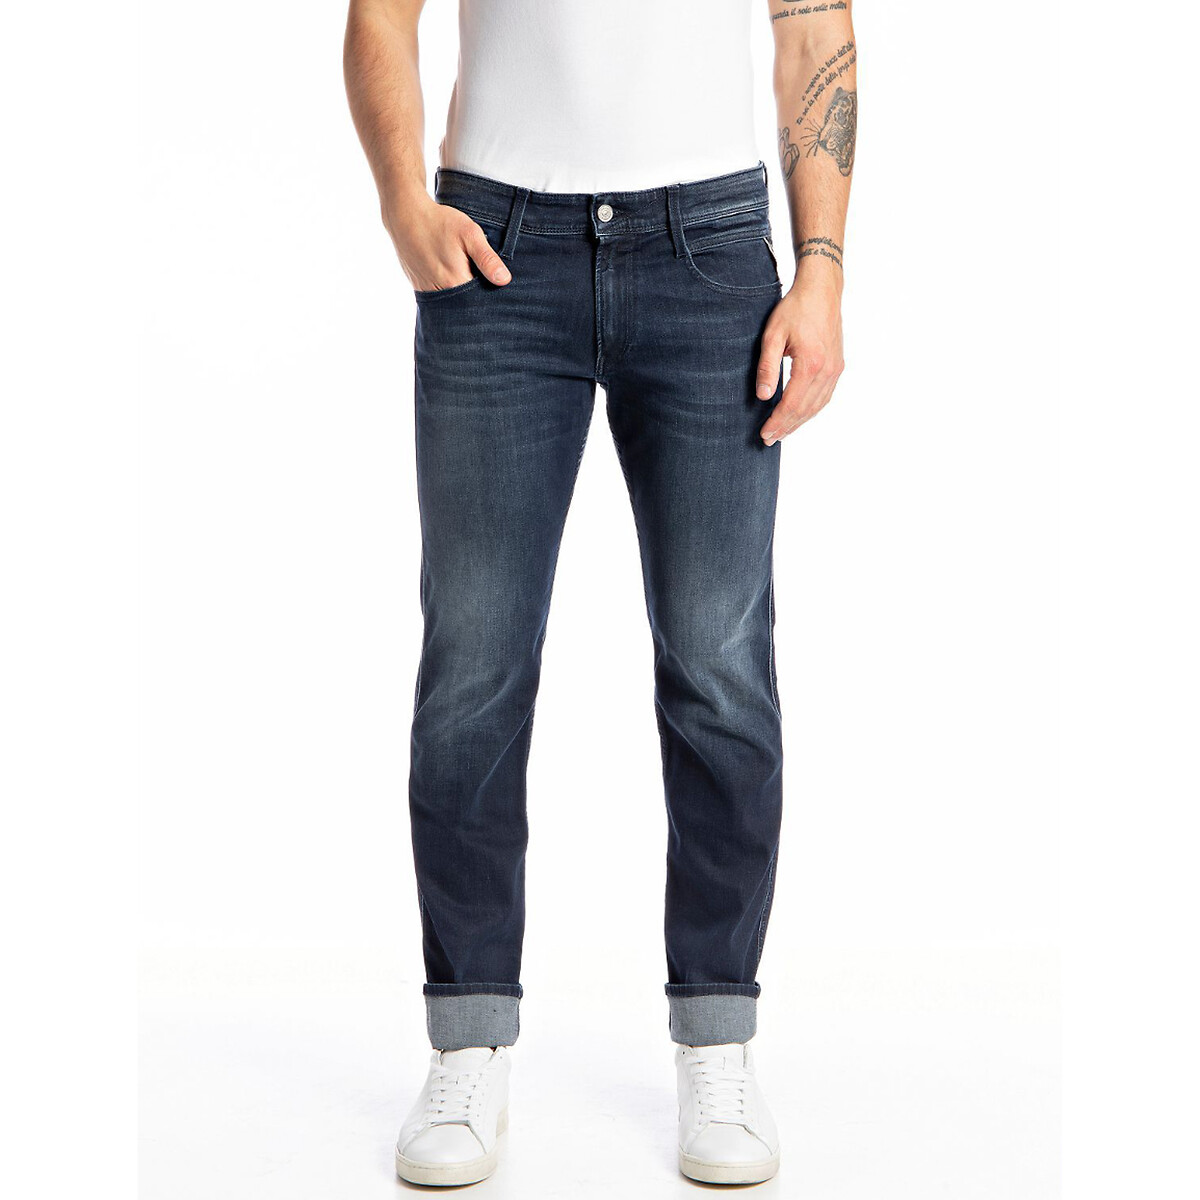 Jeans Anbass, Slim-Fit von Replay